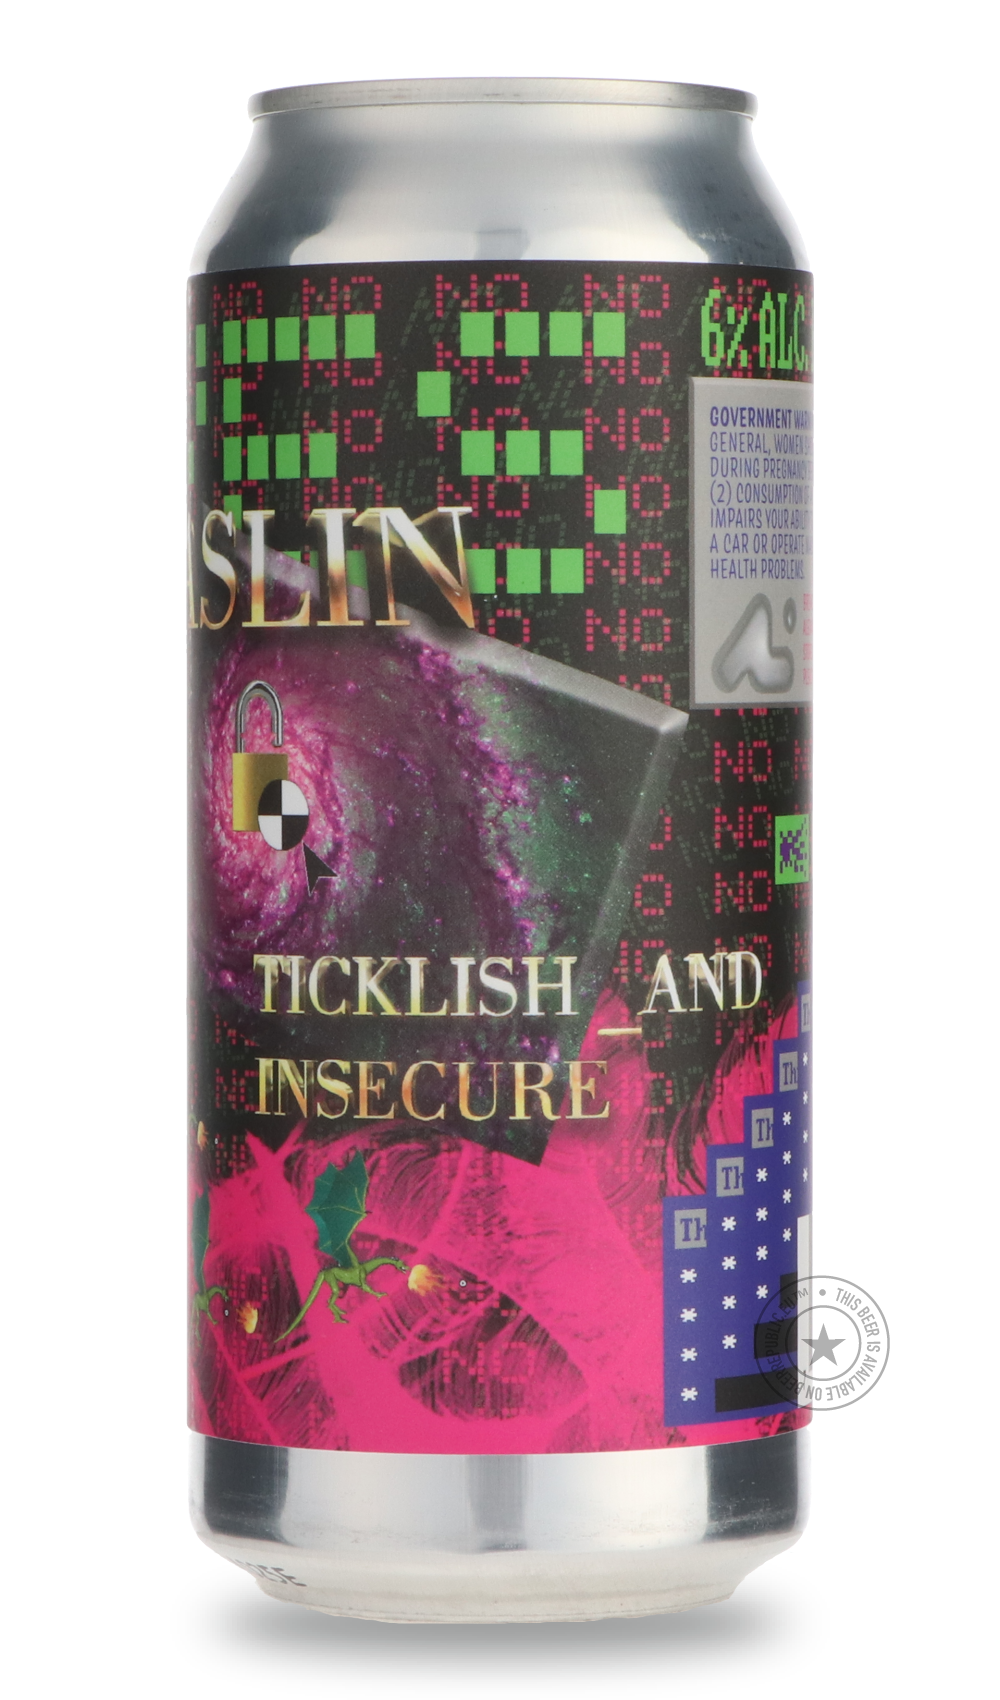 -Aslin- Ticklish And Insecure-Sour / Wild & Fruity- Only @ Beer Republic - The best online beer store for American & Canadian craft beer - Buy beer online from the USA and Canada - Bier online kopen - Amerikaans bier kopen - Craft beer store - Craft beer kopen - Amerikanisch bier kaufen - Bier online kaufen - Acheter biere online - IPA - Stout - Porter - New England IPA - Hazy IPA - Imperial Stout - Barrel Aged - Barrel Aged Imperial Stout - Brown - Dark beer - Blond - Blonde - Pilsner - Lager - Wheat - Wei